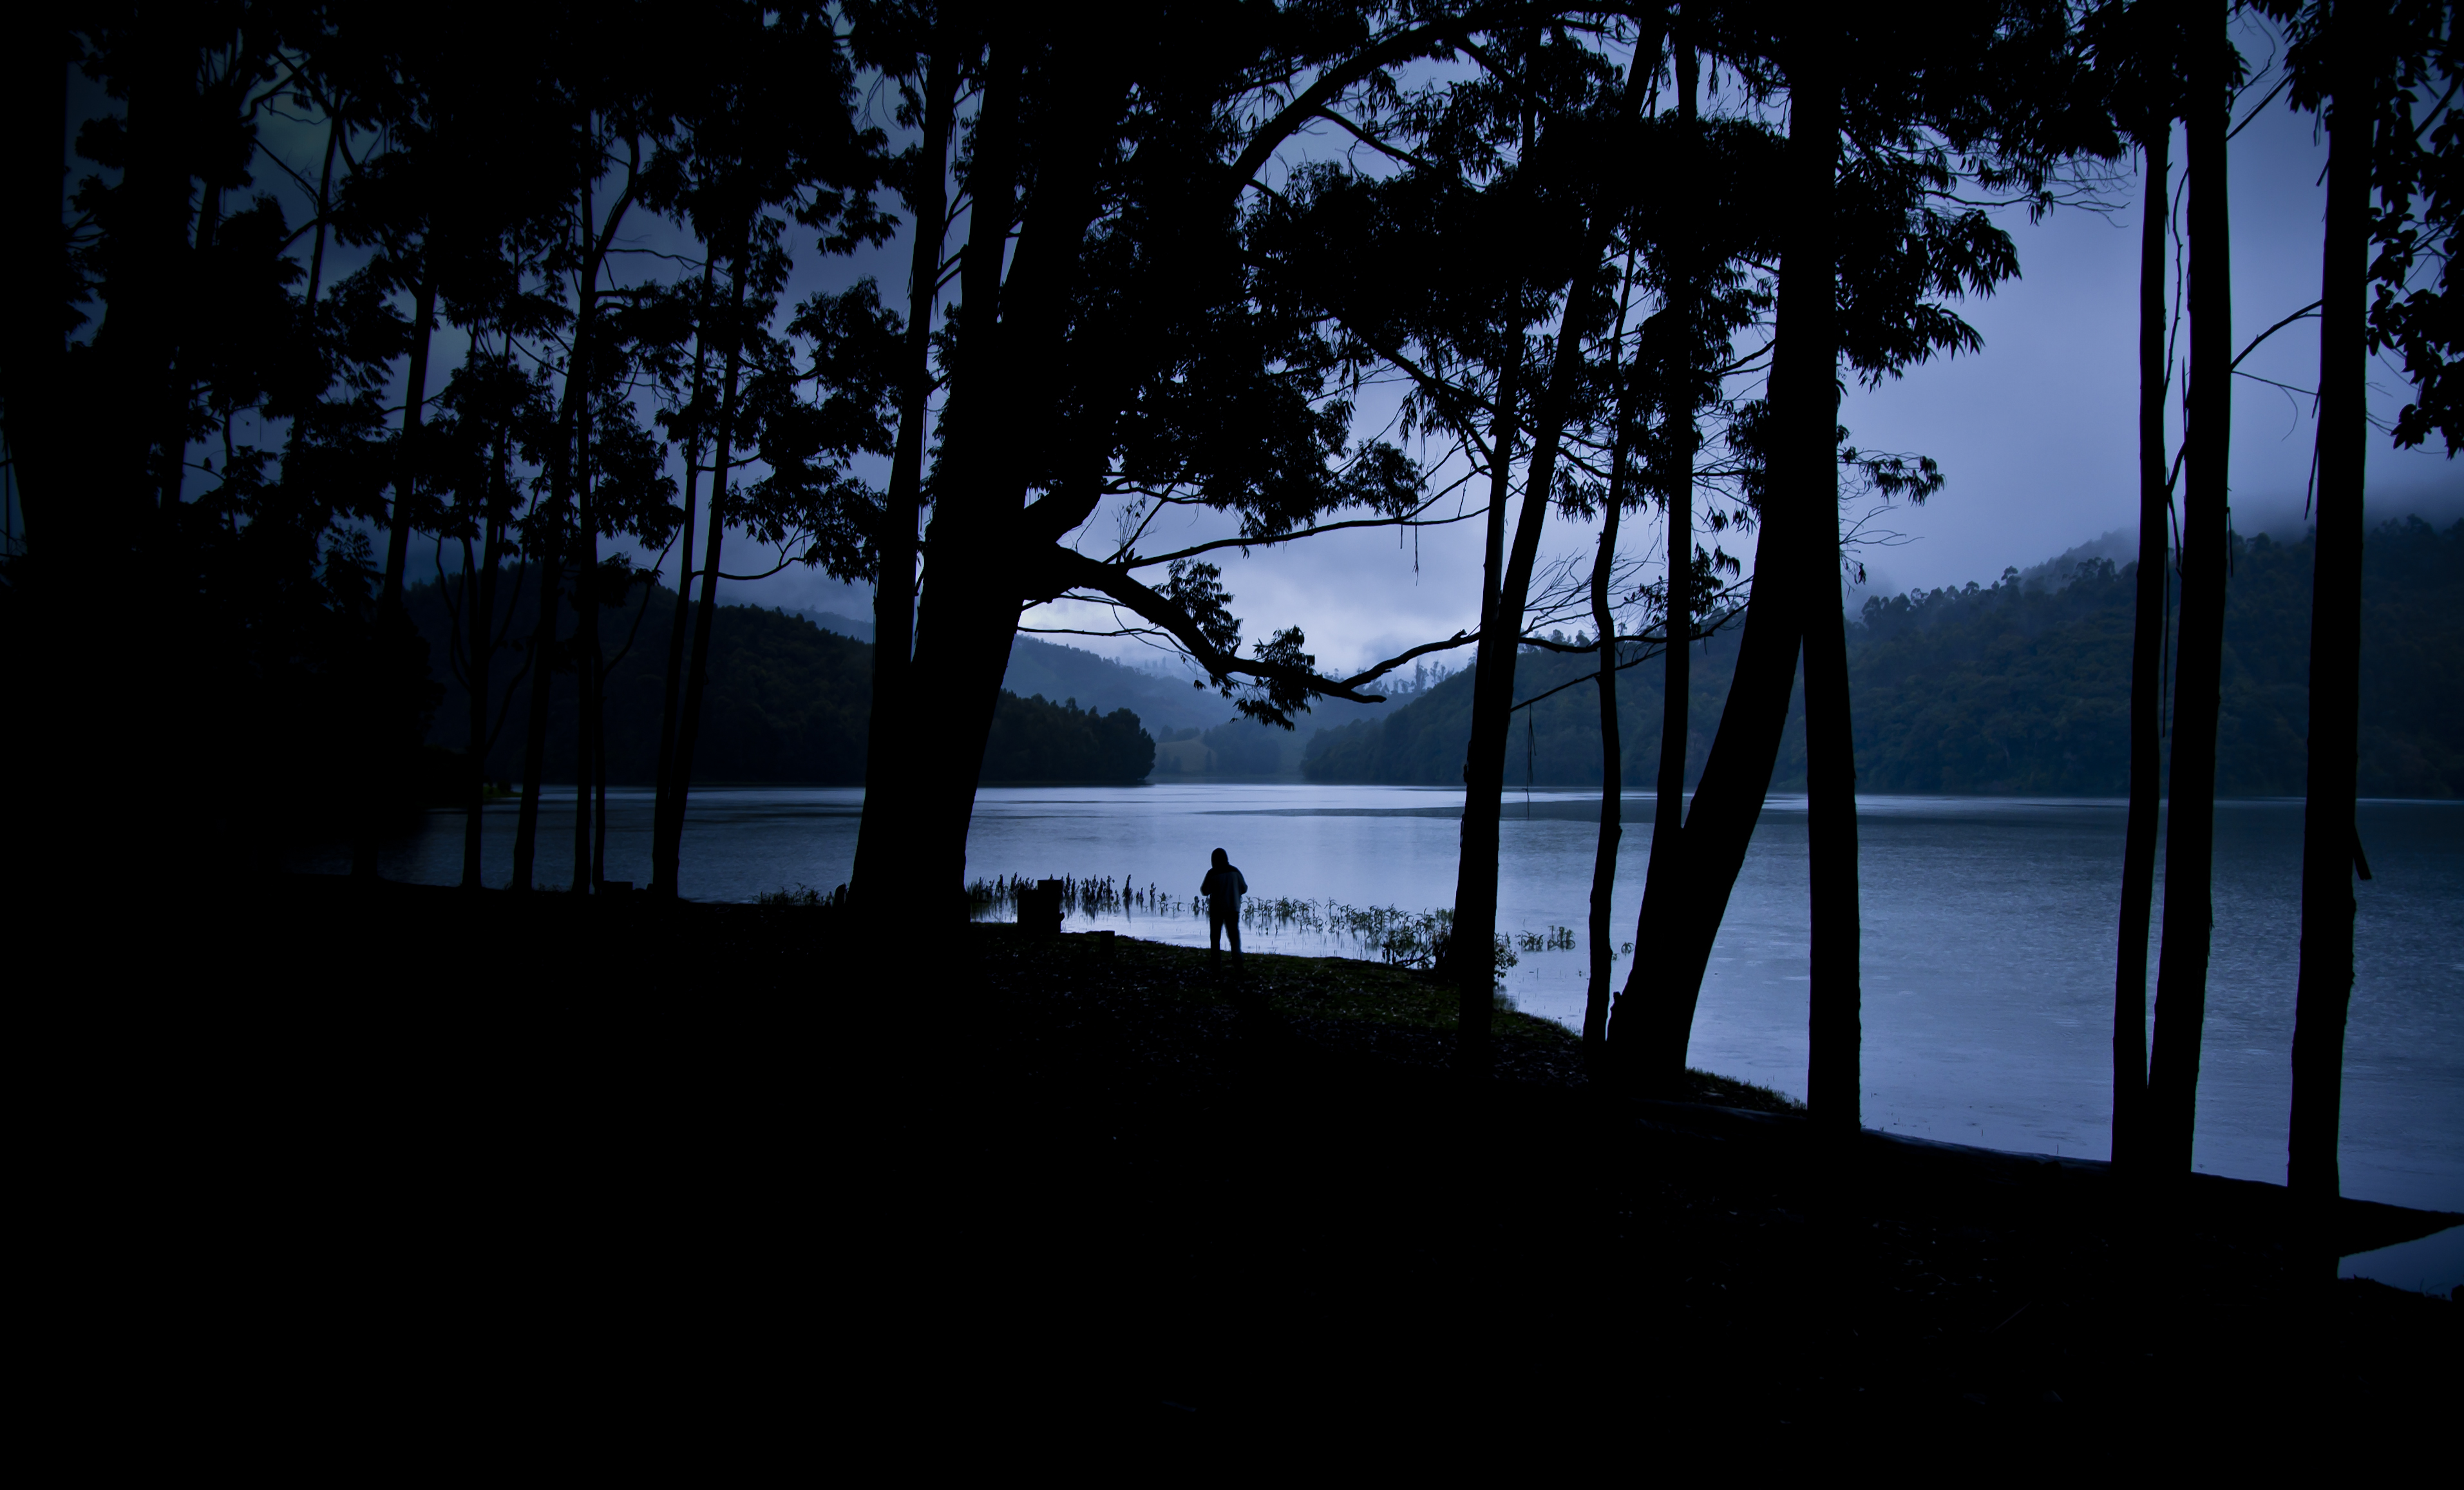 privacy, trees, lake, dark, silhouette, seclusion, human, person, loneliness